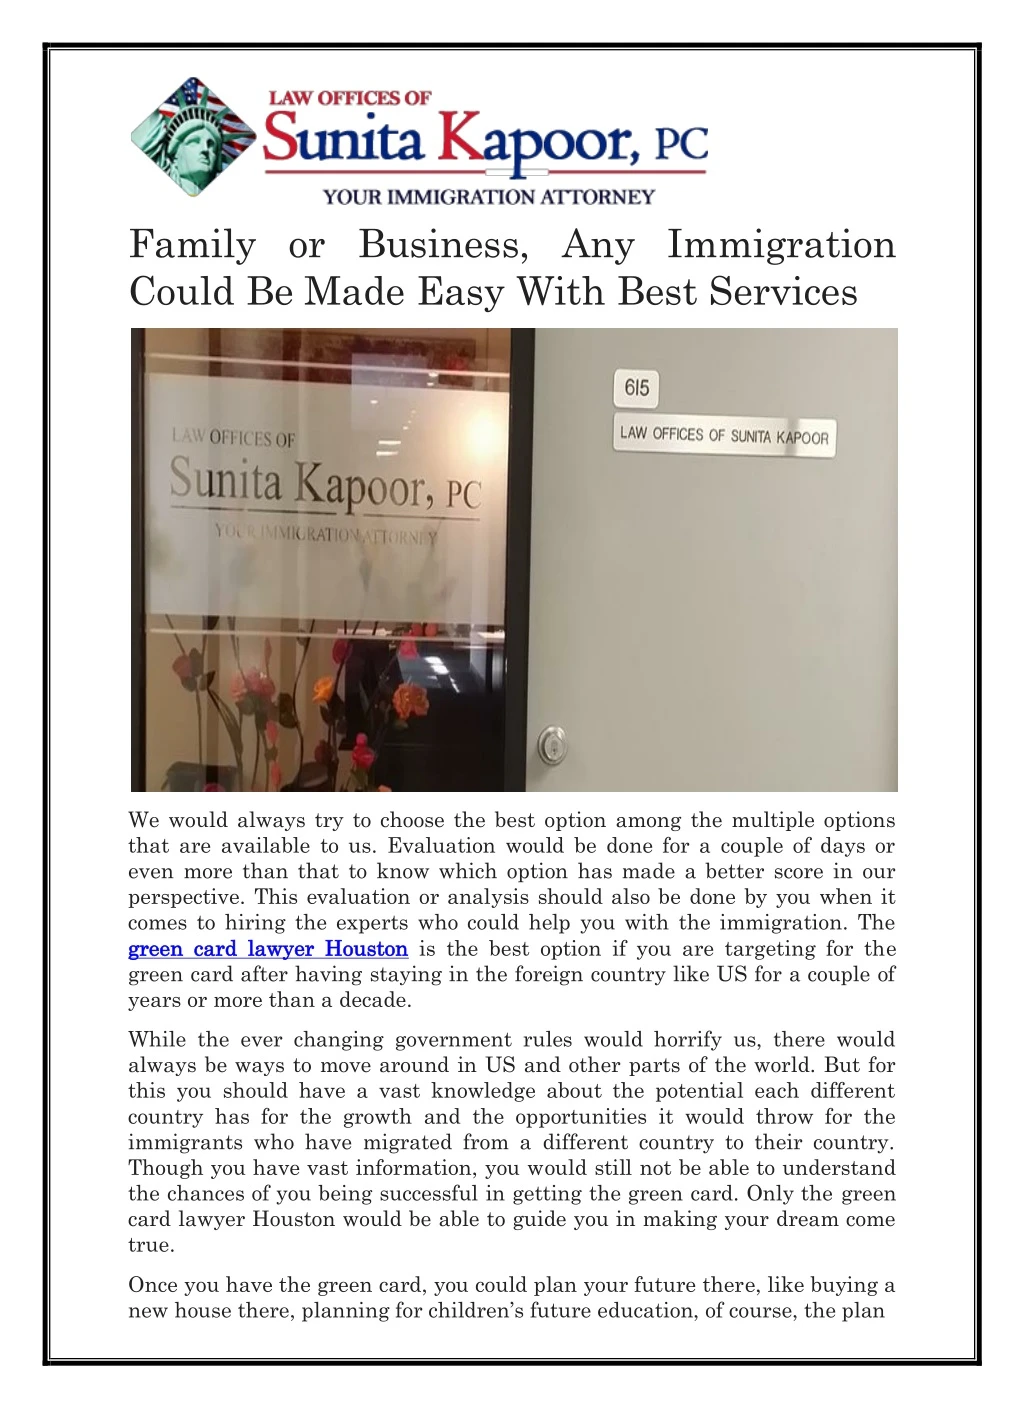 family or business any immigration could be made